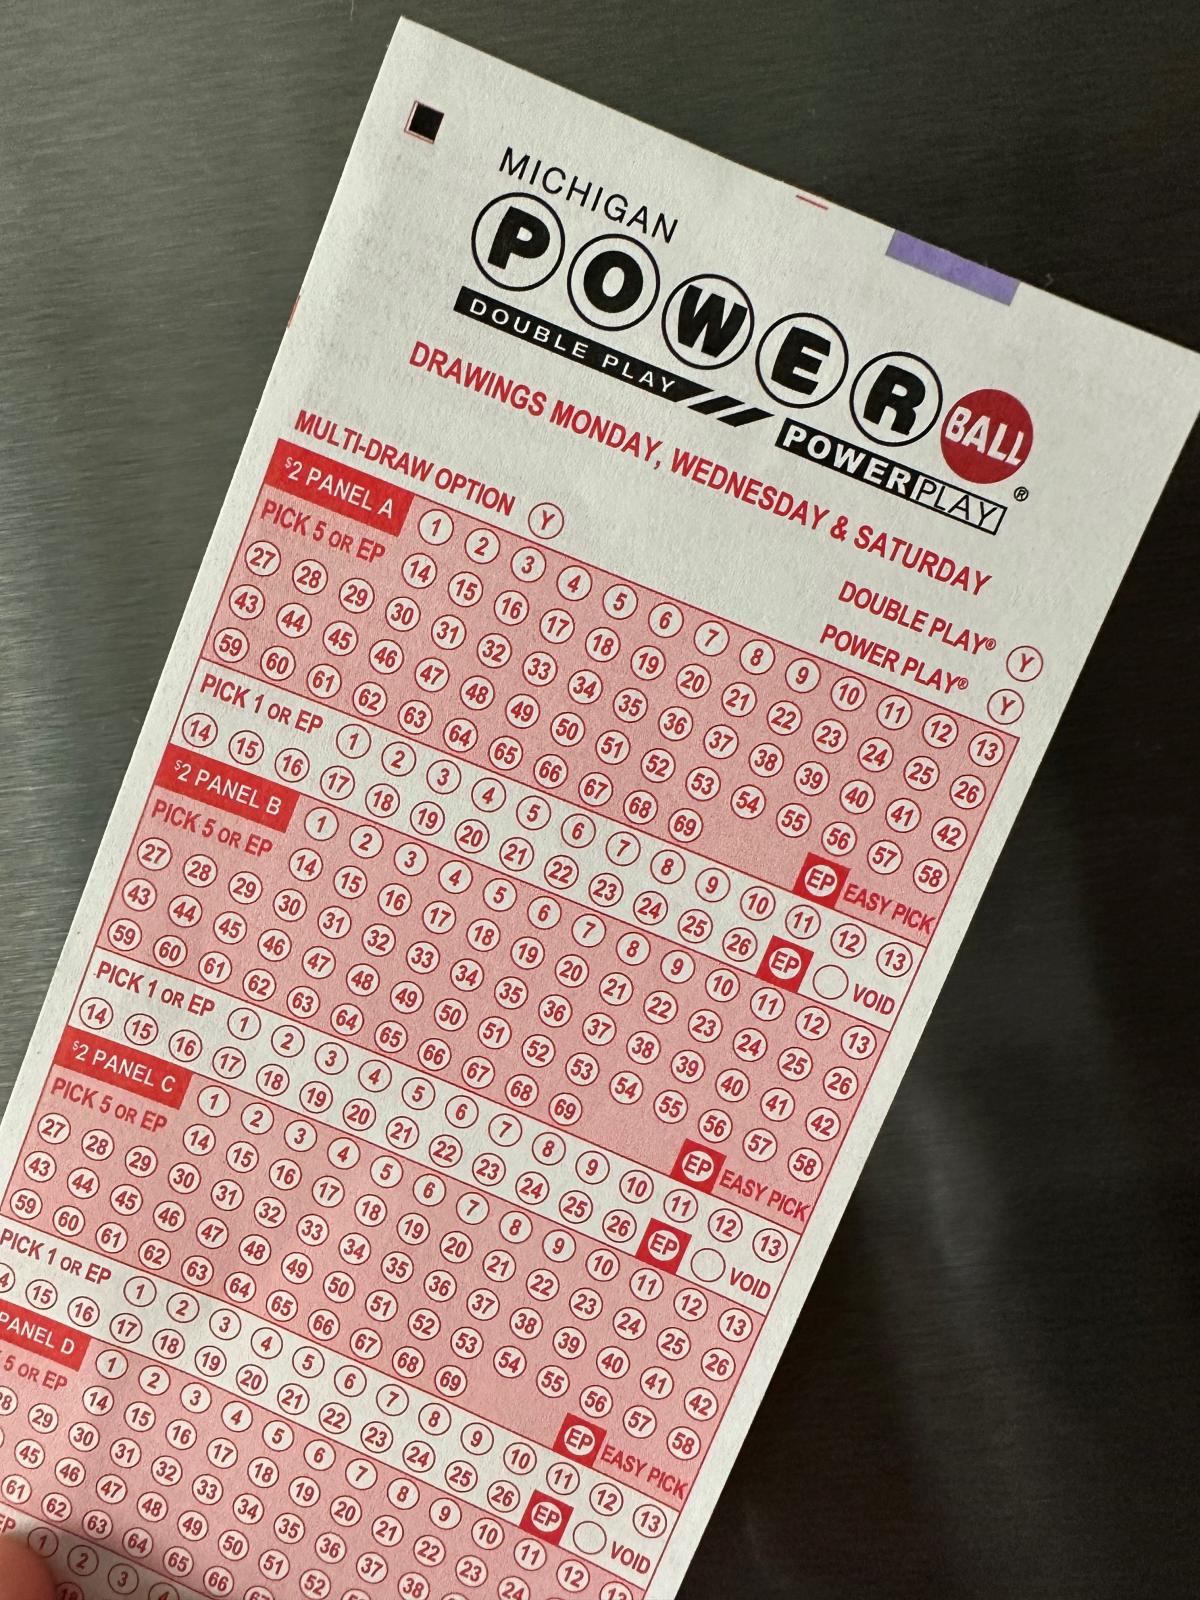 No winners for Monday, Oct. 9 Powerball drawing. Jackpot up to 1.73